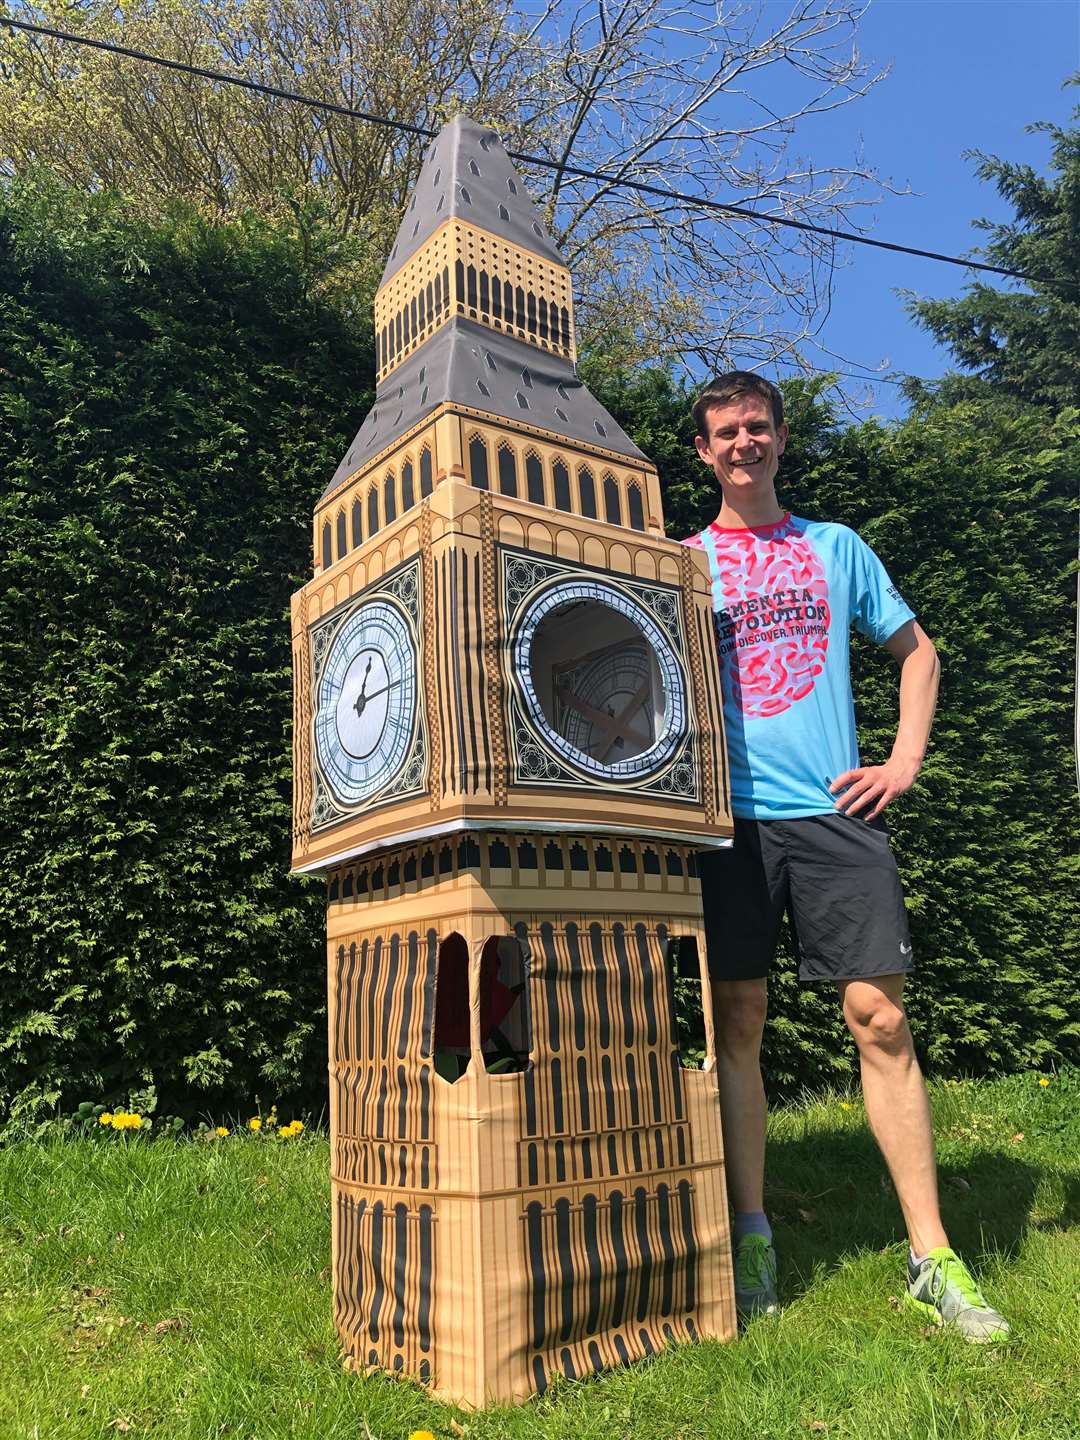 Morgan donated £1,000 to Lukas Bates' fundraiser after his Big Ben costume was returned. Picture: Alzheimer's Research UK